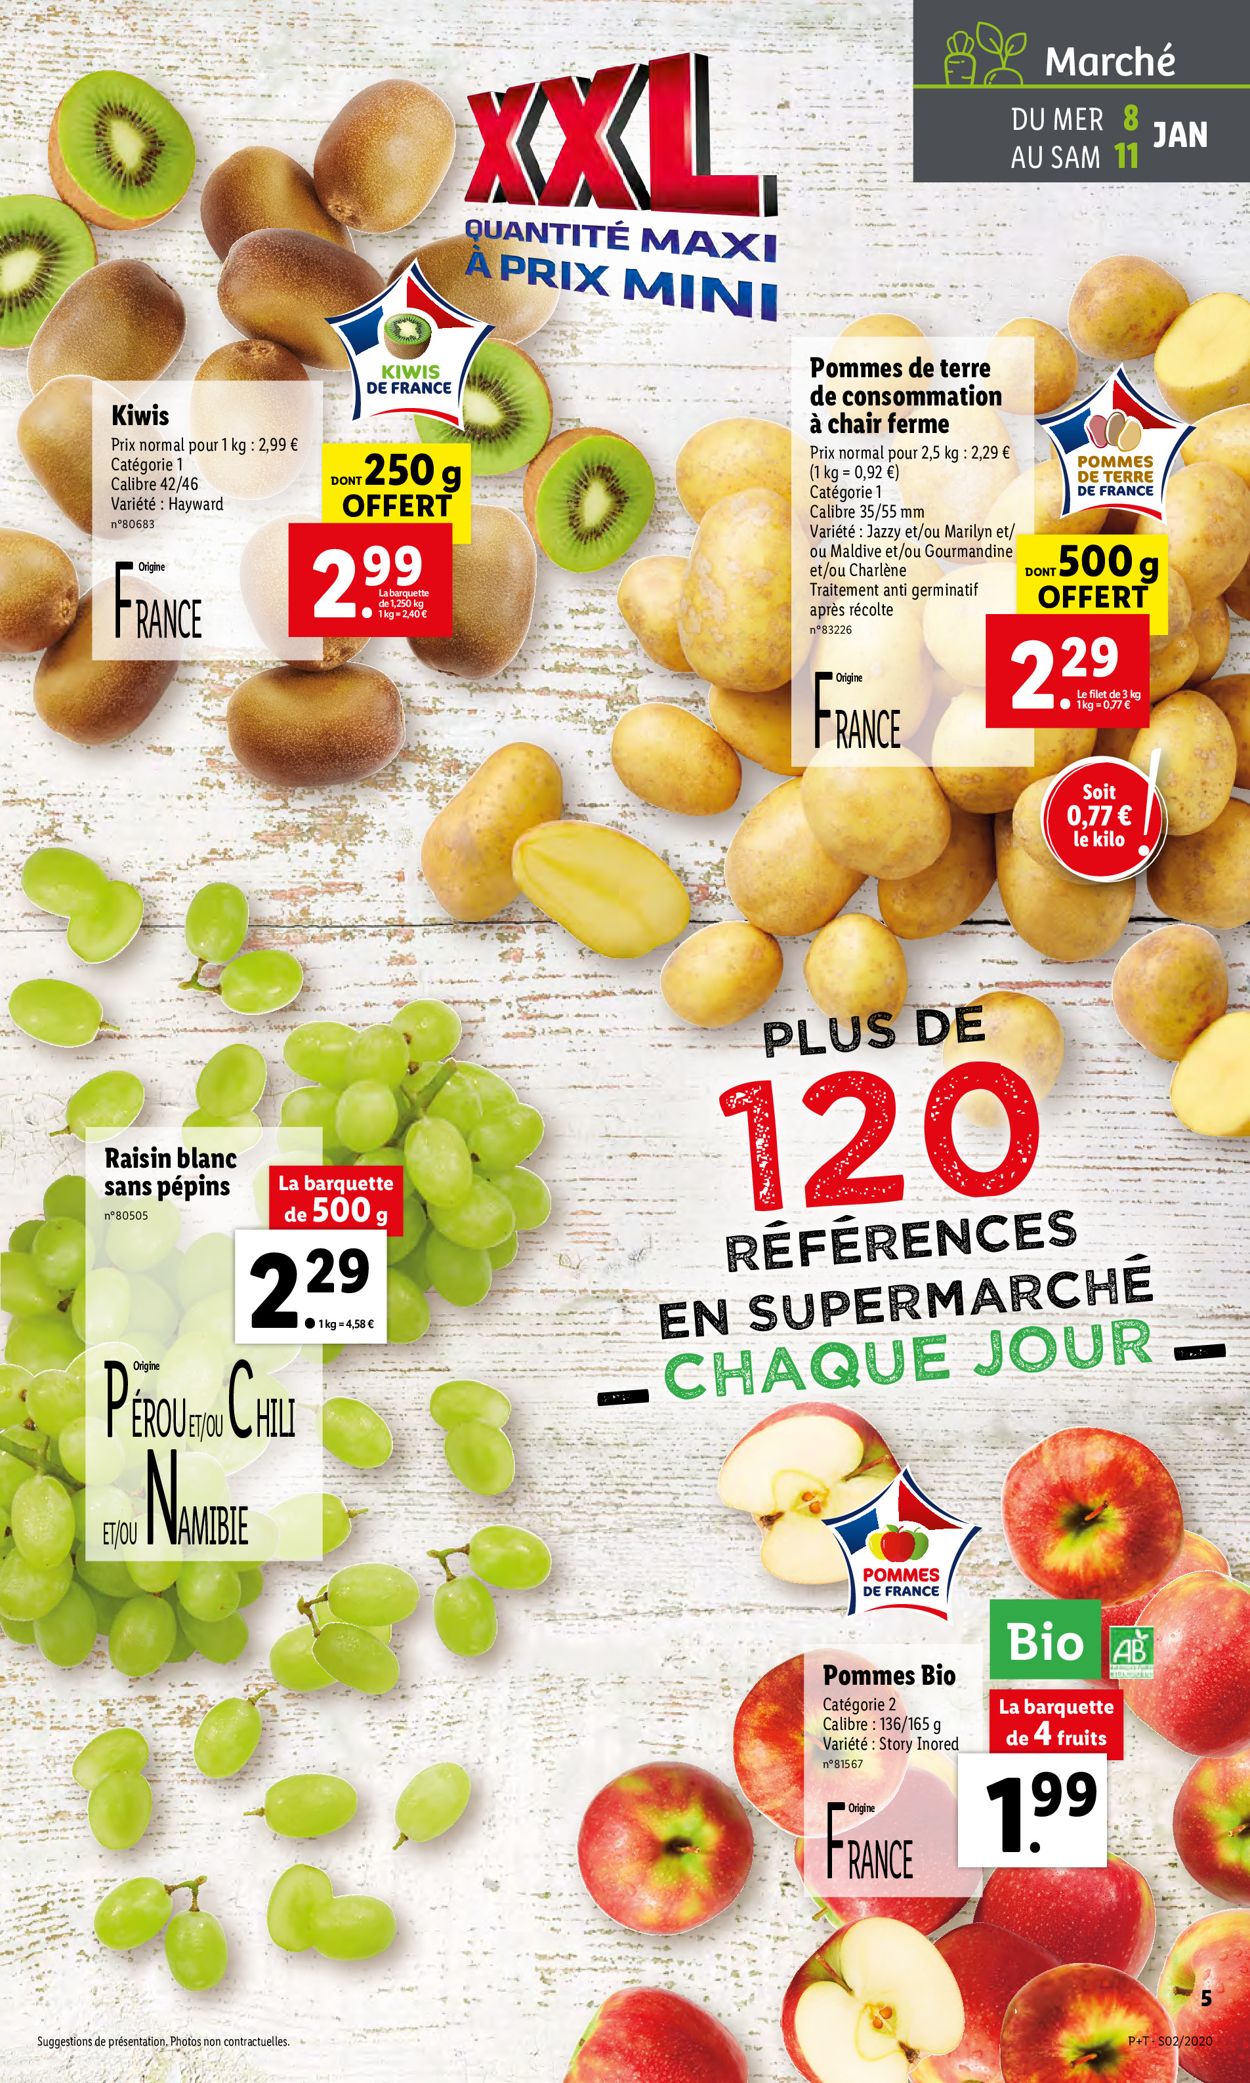 Lidl Catalogue - 08.01-14.01.2020 (Page 5)